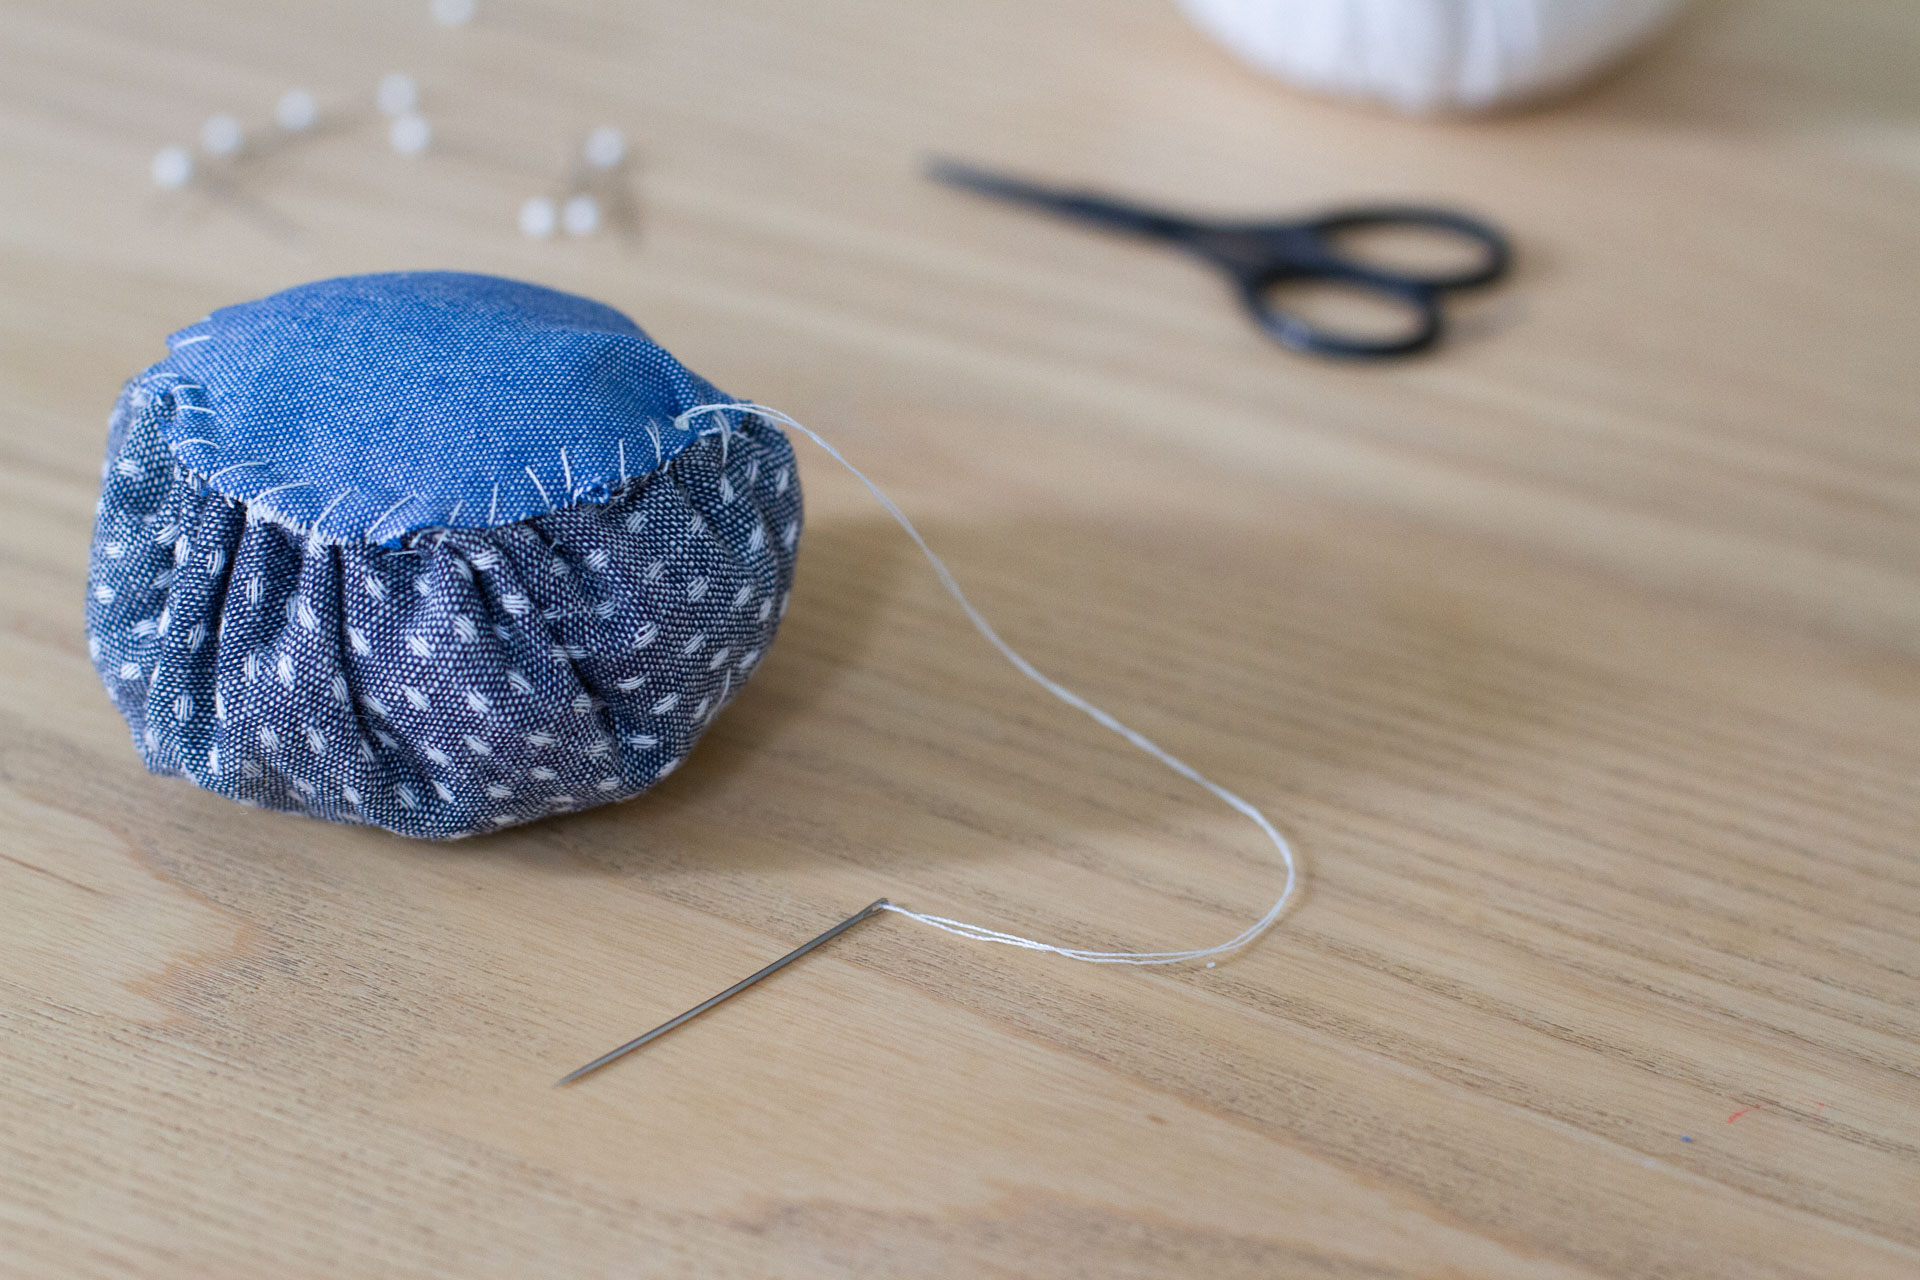 make your own: pincushion. – Reading My Tea Leaves – Slow, simple